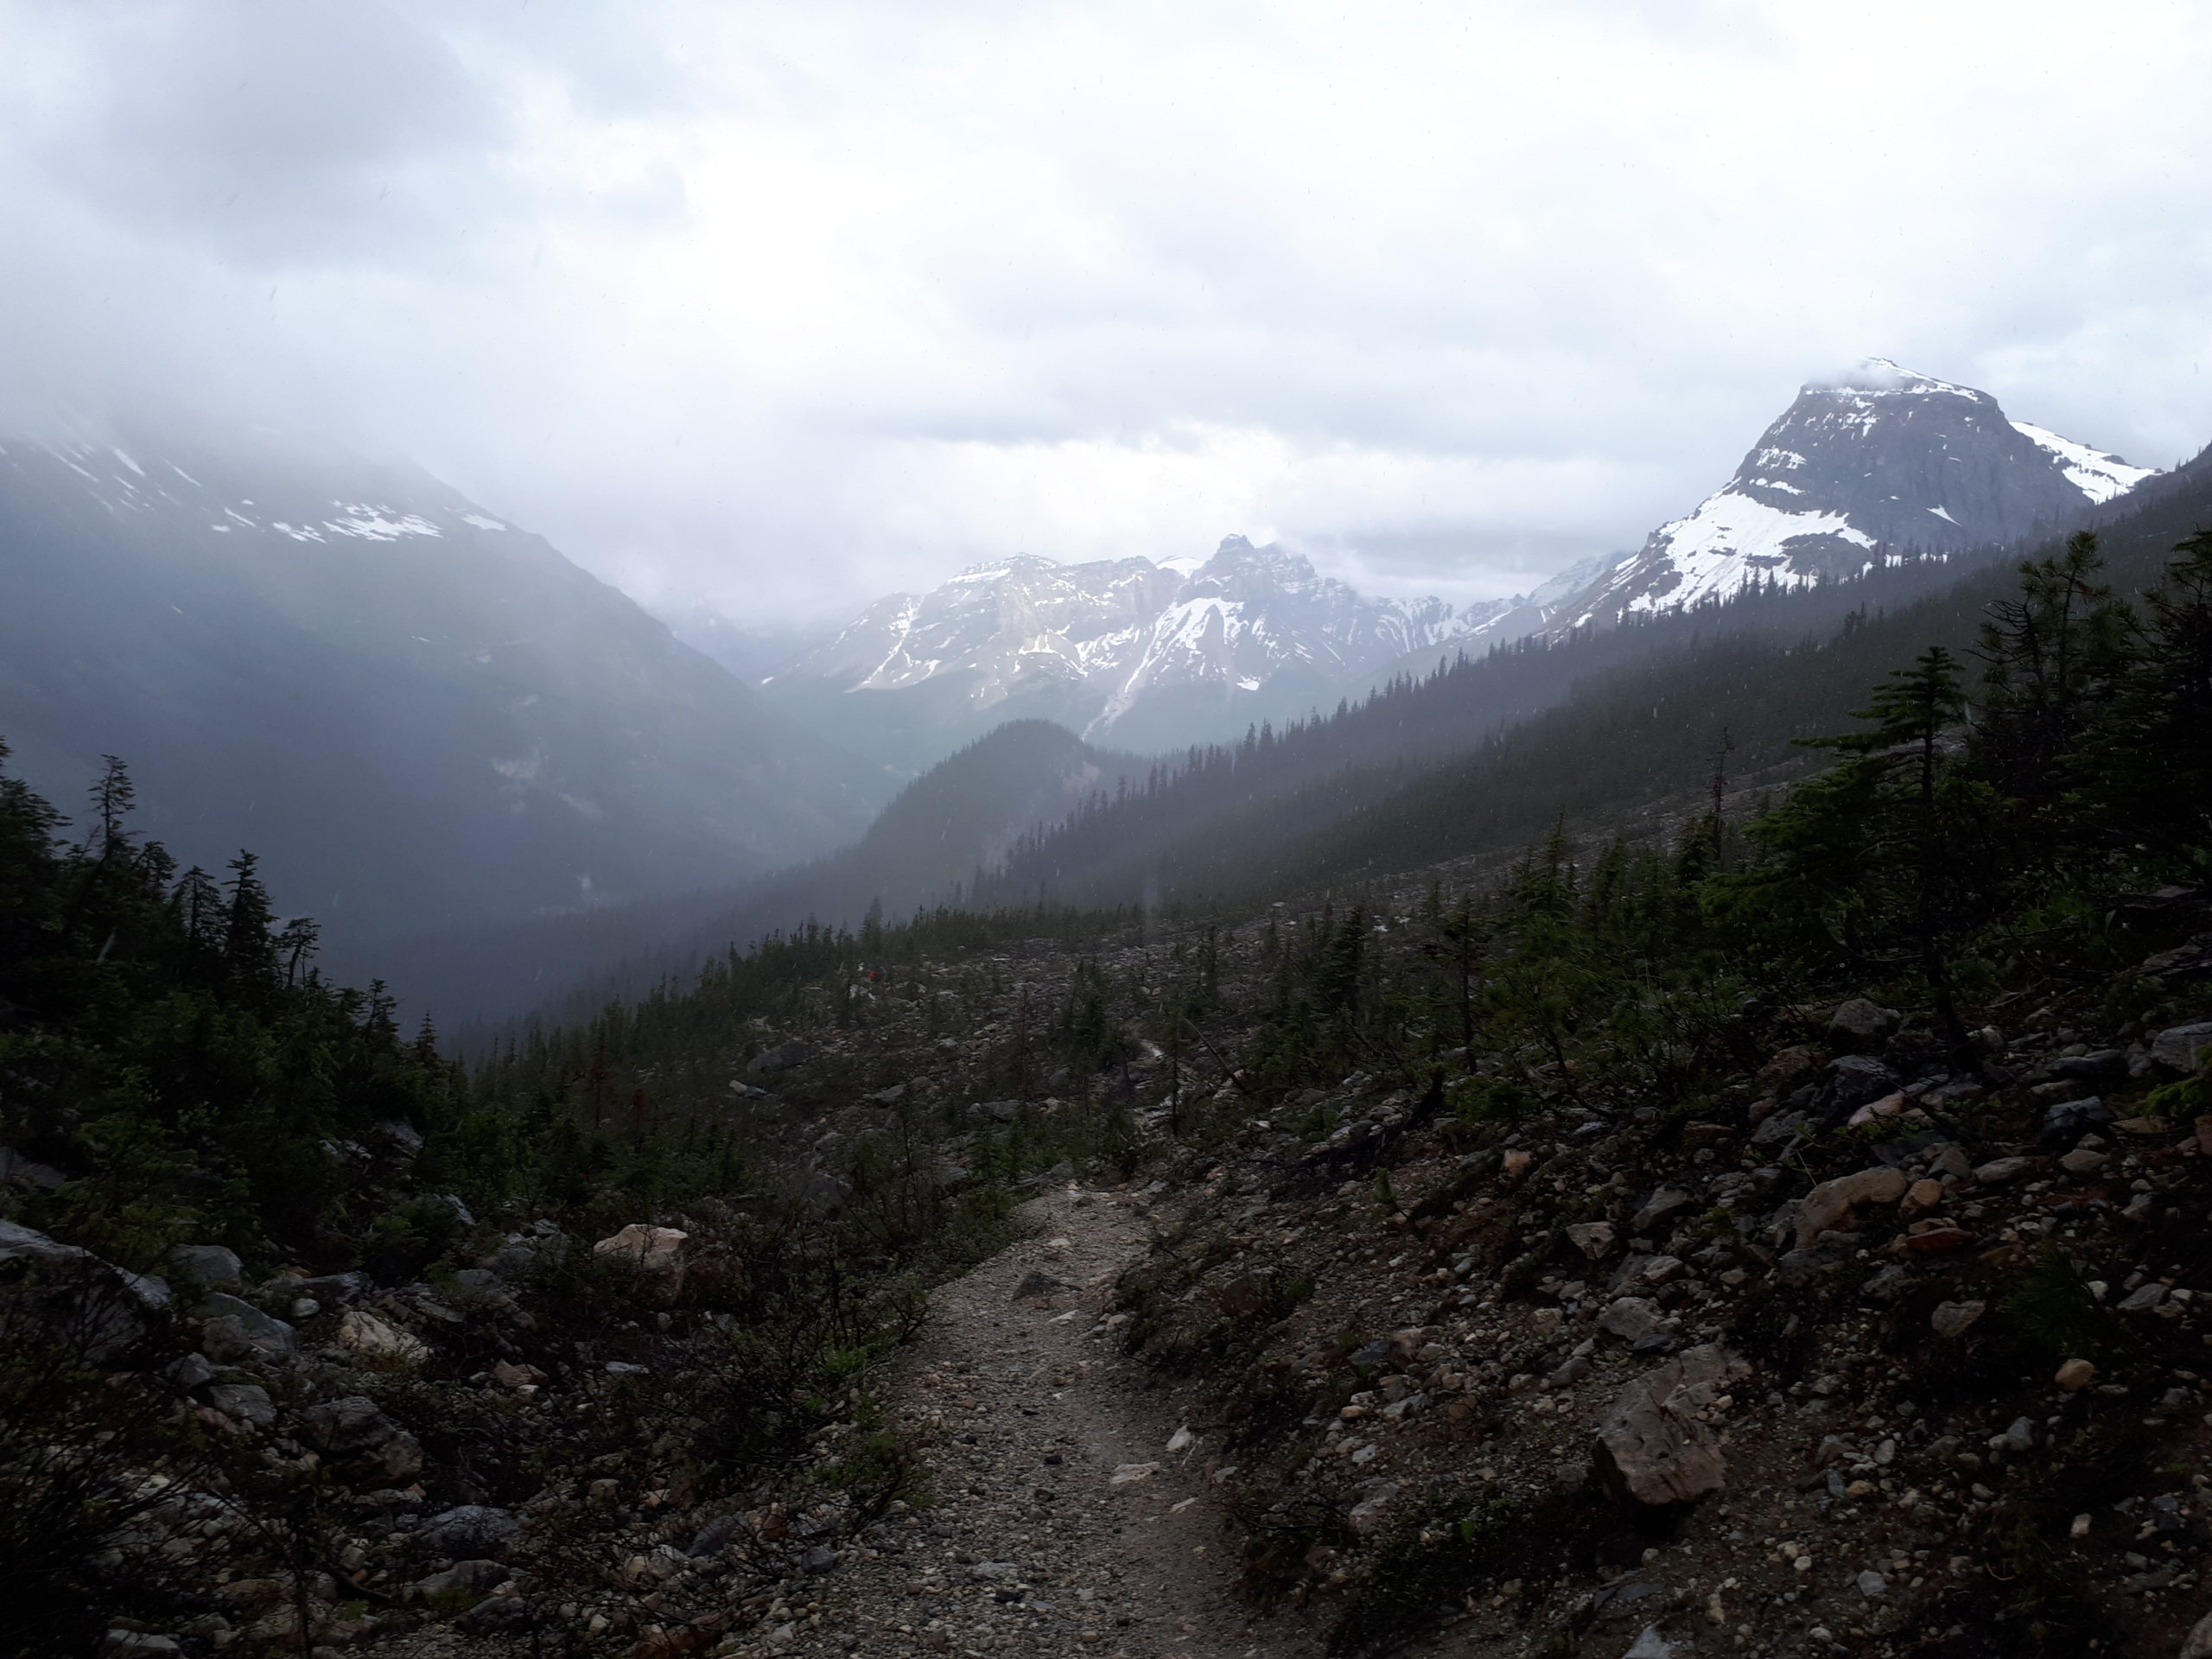 Hiking trail to Yoho Lake on a rainy day with a view of the mountain range and forest in the distance.